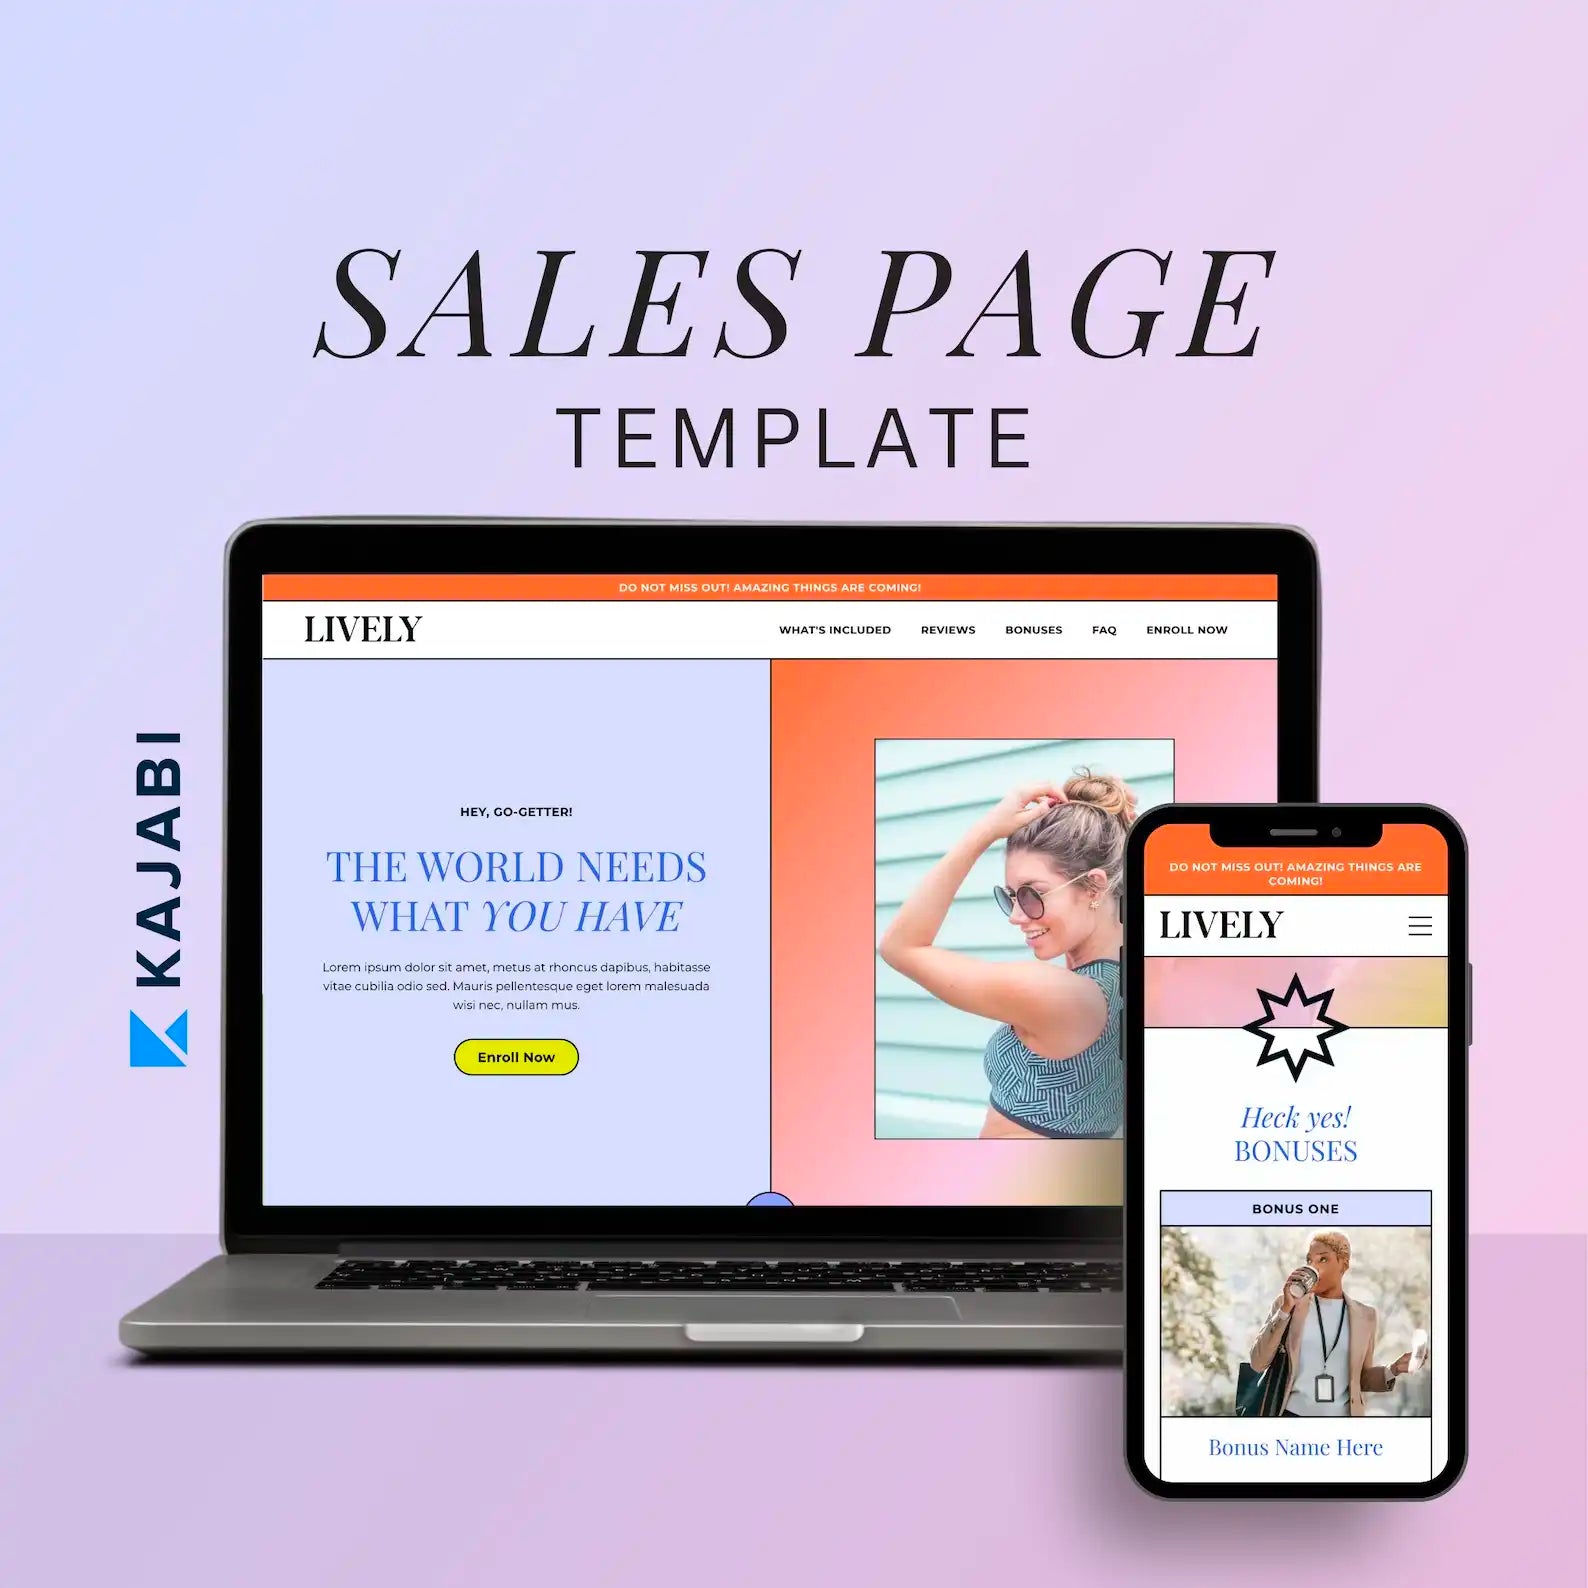 Just-Add-Your-Brand_Kajabi-Template_Sales-Page_Lively-1.webp